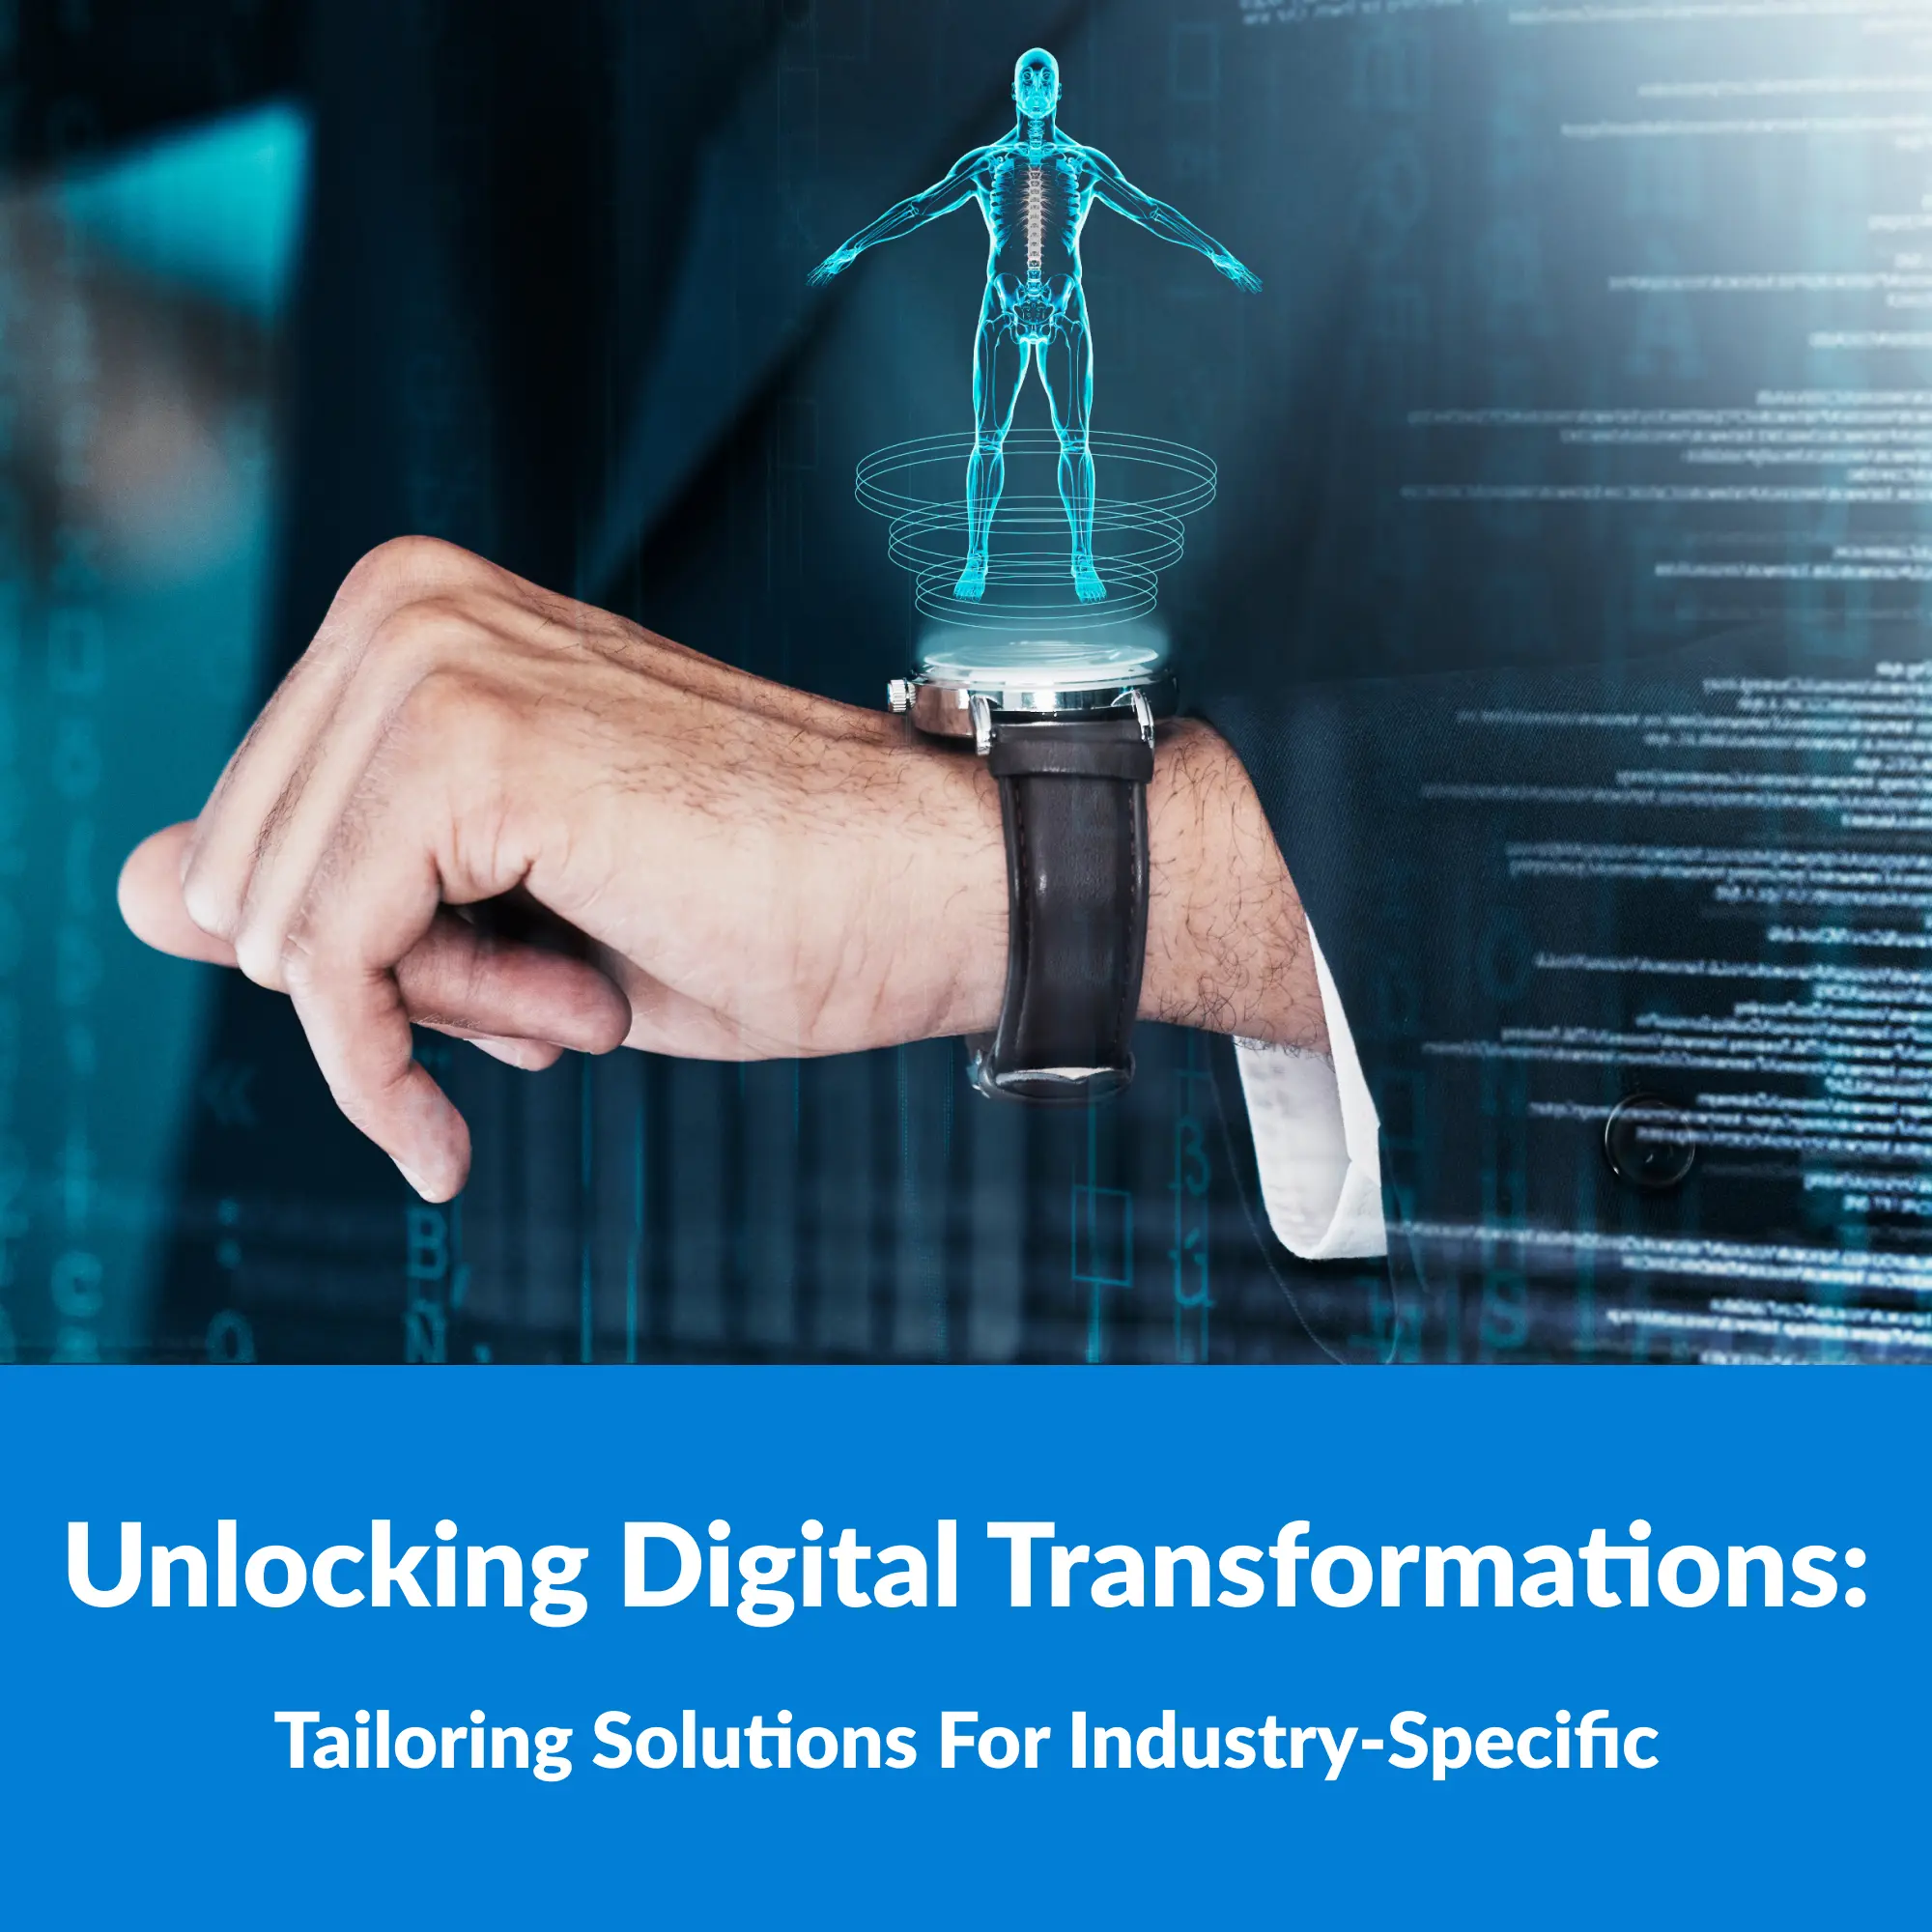 Unlocking Industry-Specific Digital Transformations: Tailoring Solutions for Healthcare, Finance, Manufacturing, and Beyond